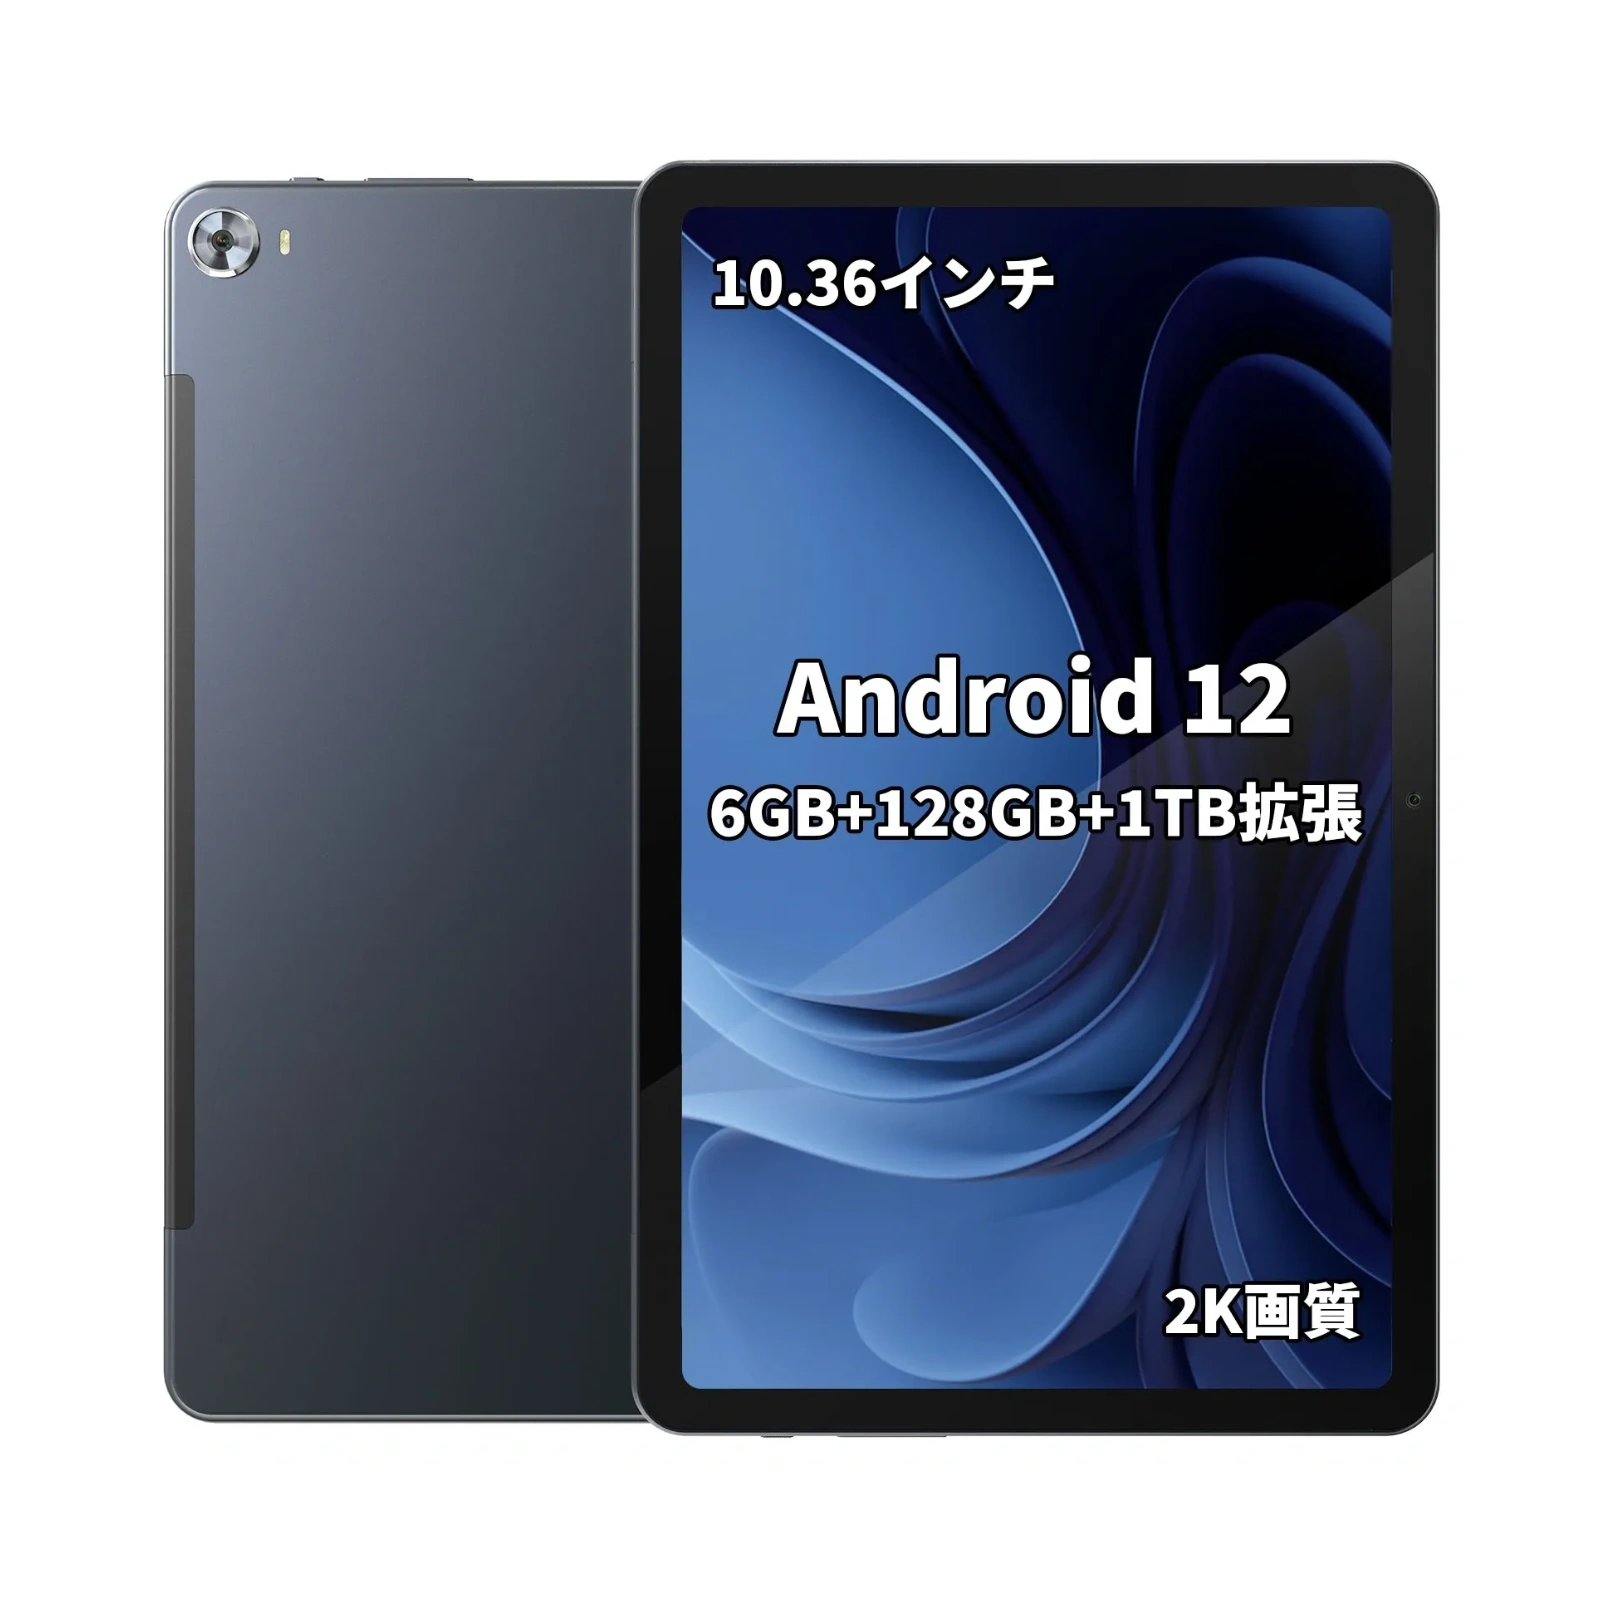 Android タブレット 10.36インチ 128GB アーアユー 豪華 - Android 